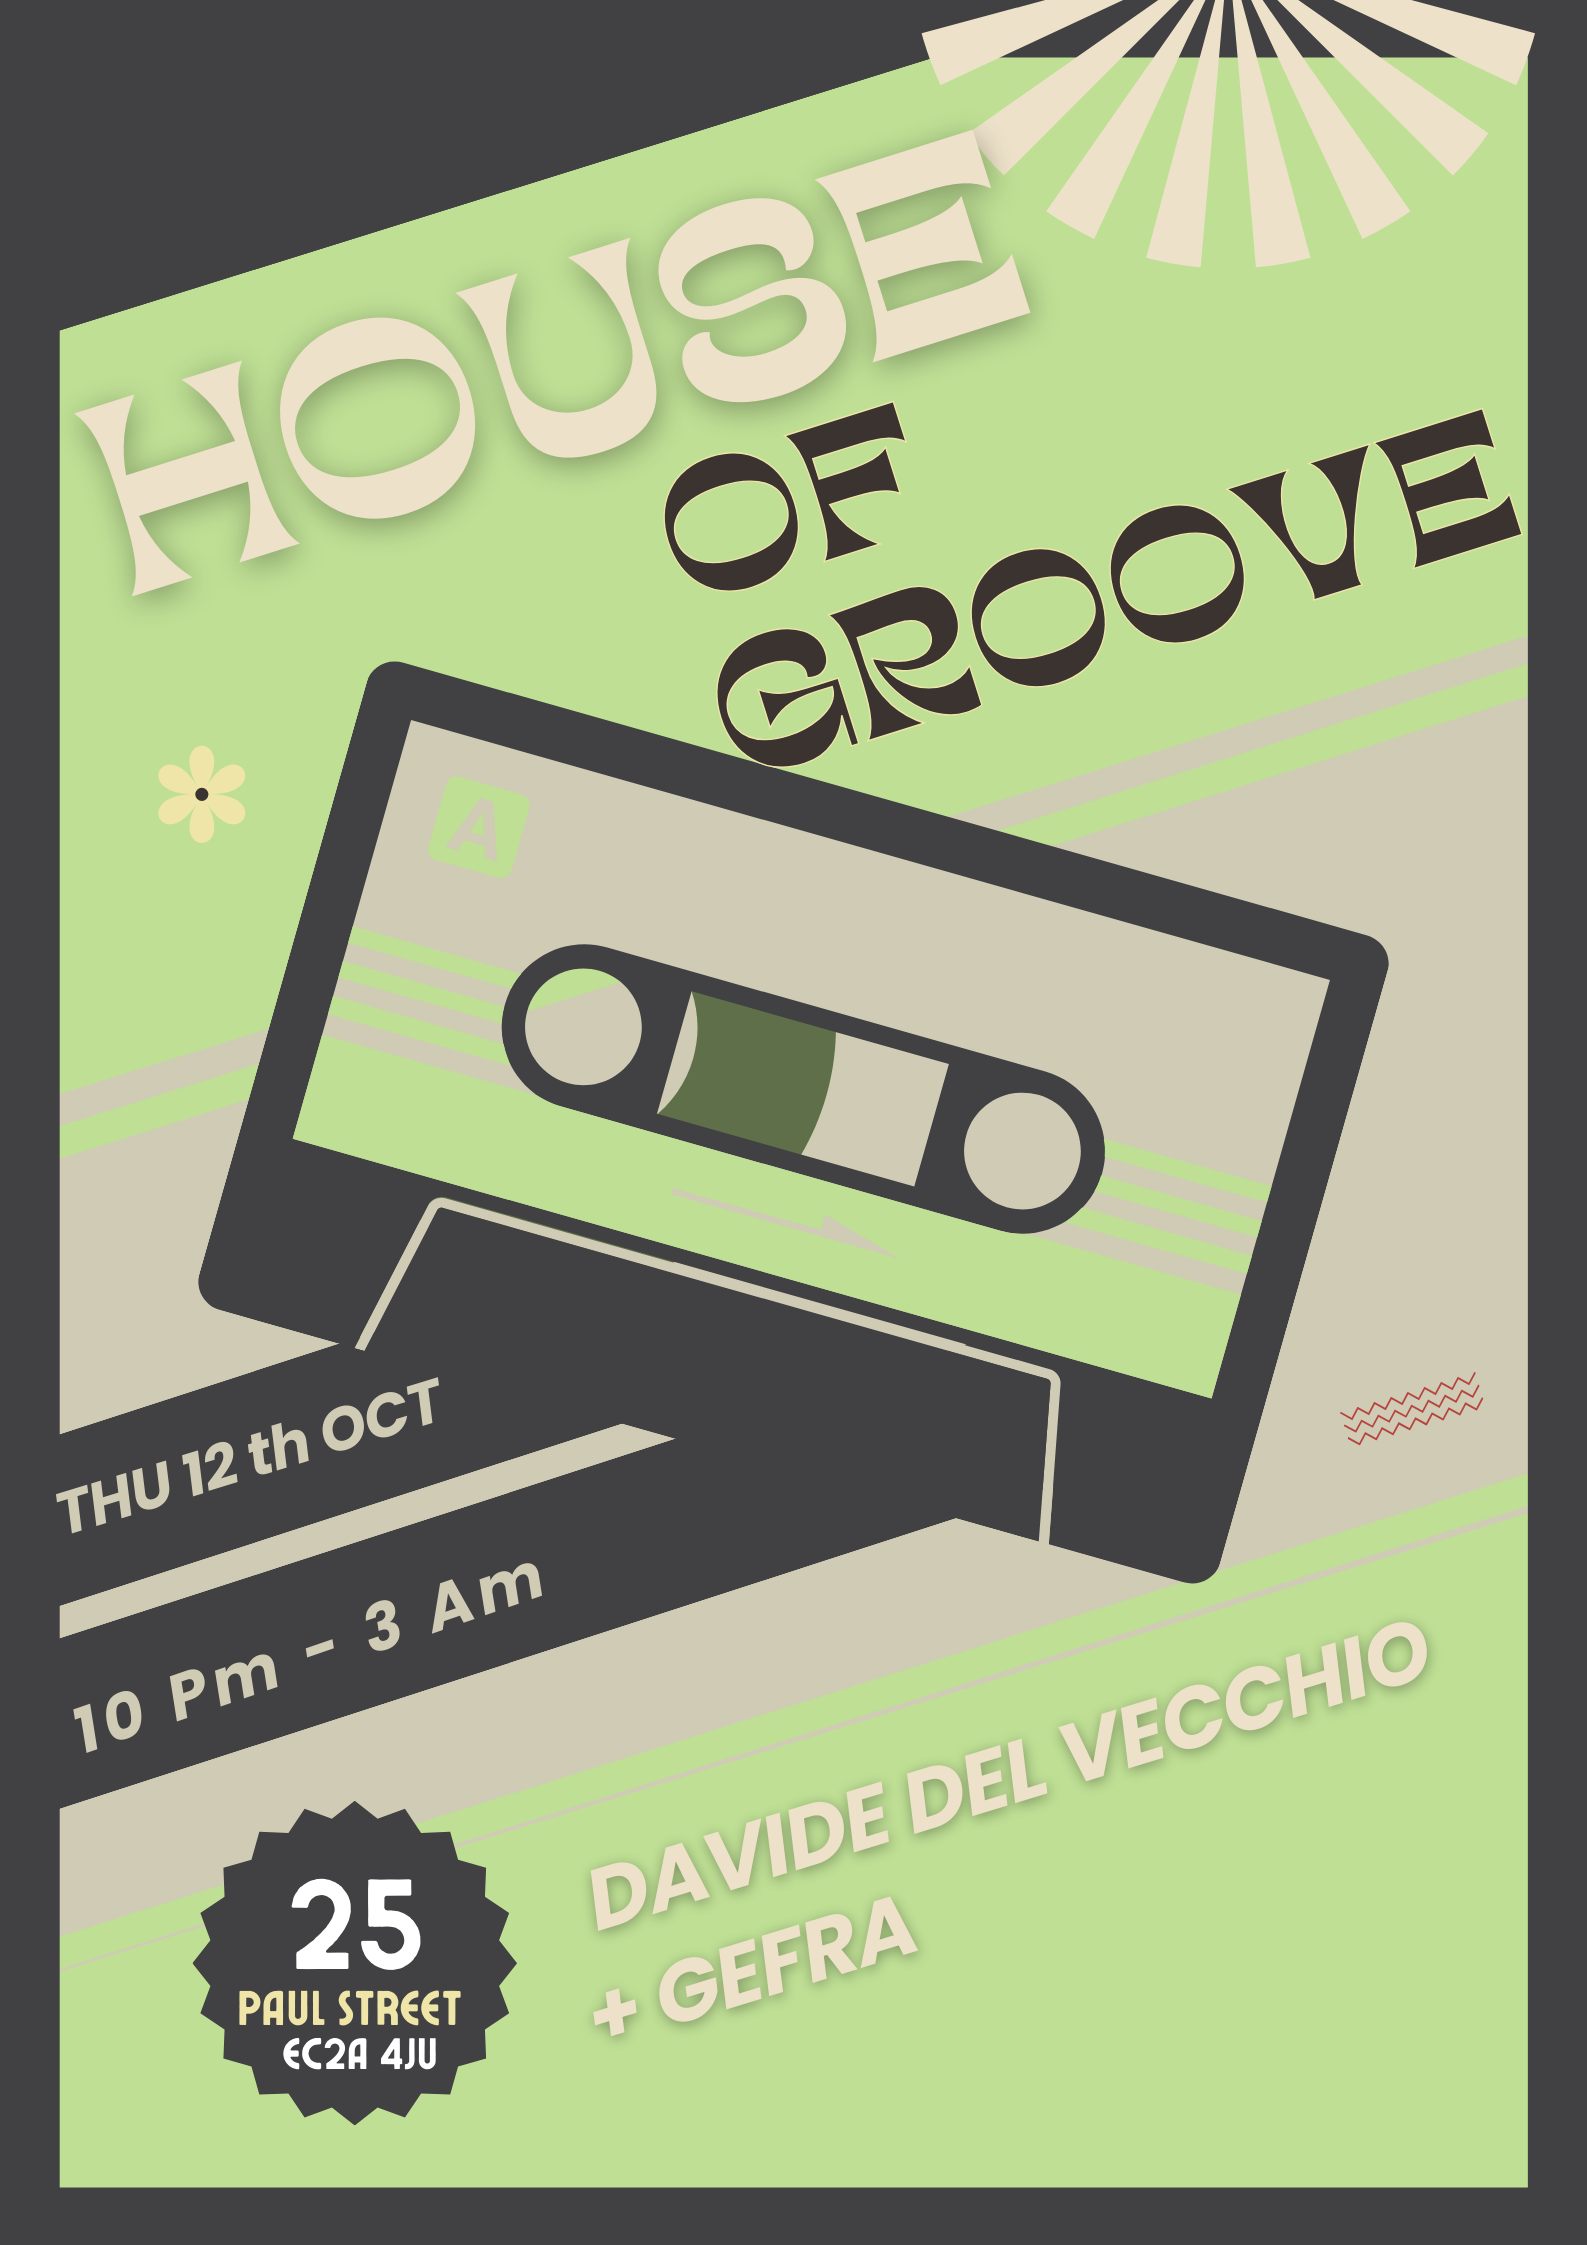 HOUSE OF GROOVE - フライヤー表